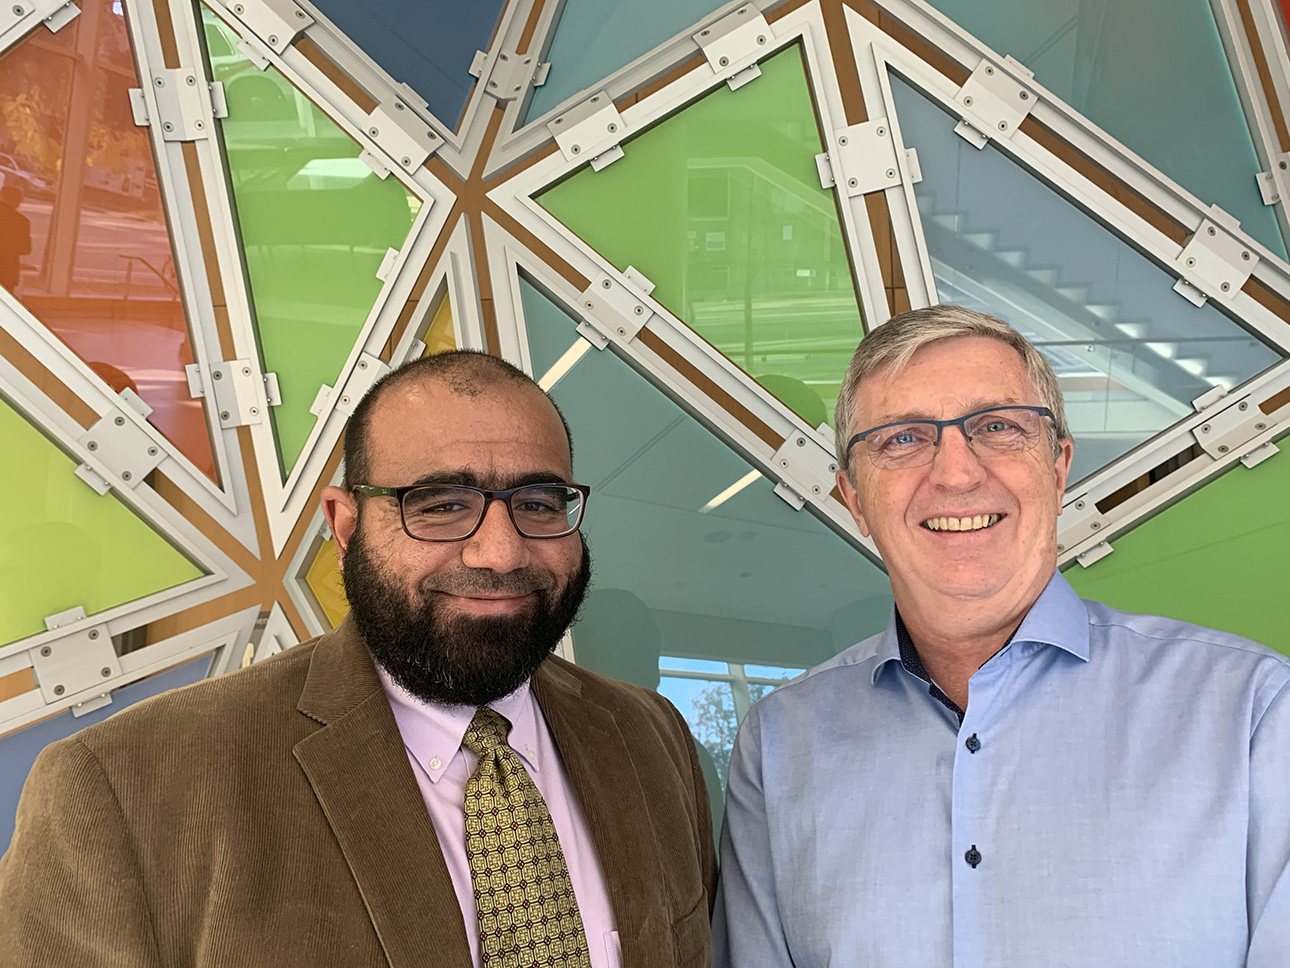 Drs. Ahmed Abou-Setta and Stéphane Groulx